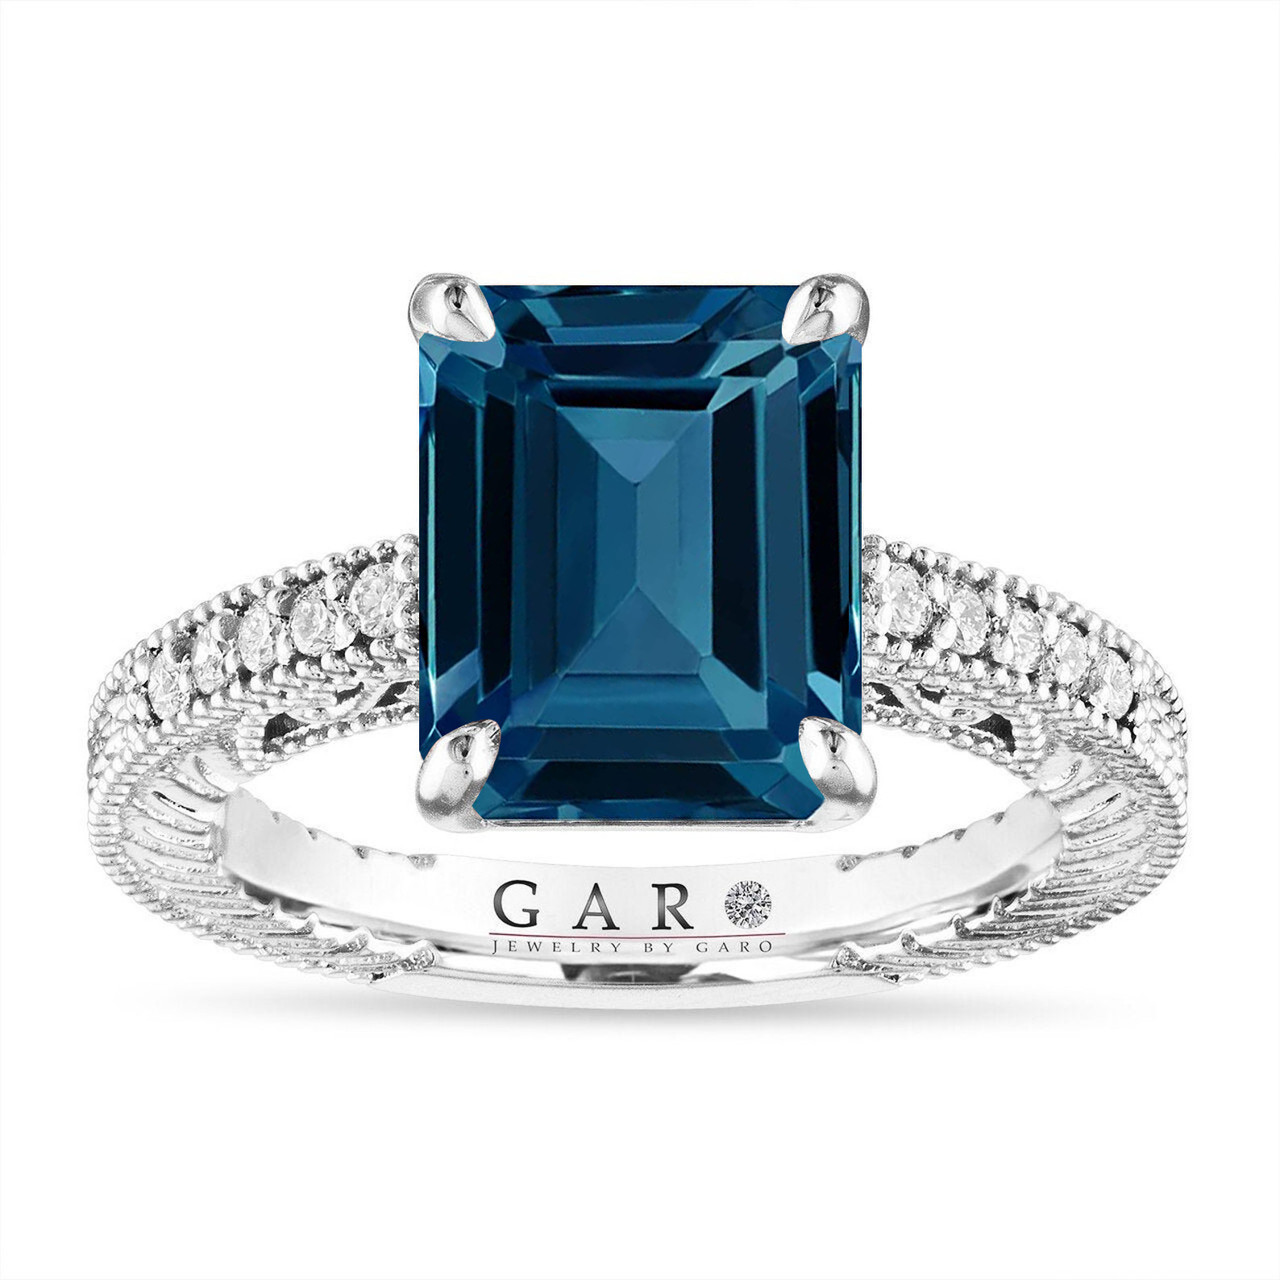 Gold Marquise Cut London Blue Topaz Engagement Ring - MollyJewelryUS | Topaz  engagement ring, London blue topaz engagement rings, Blue topaz engagement  ring